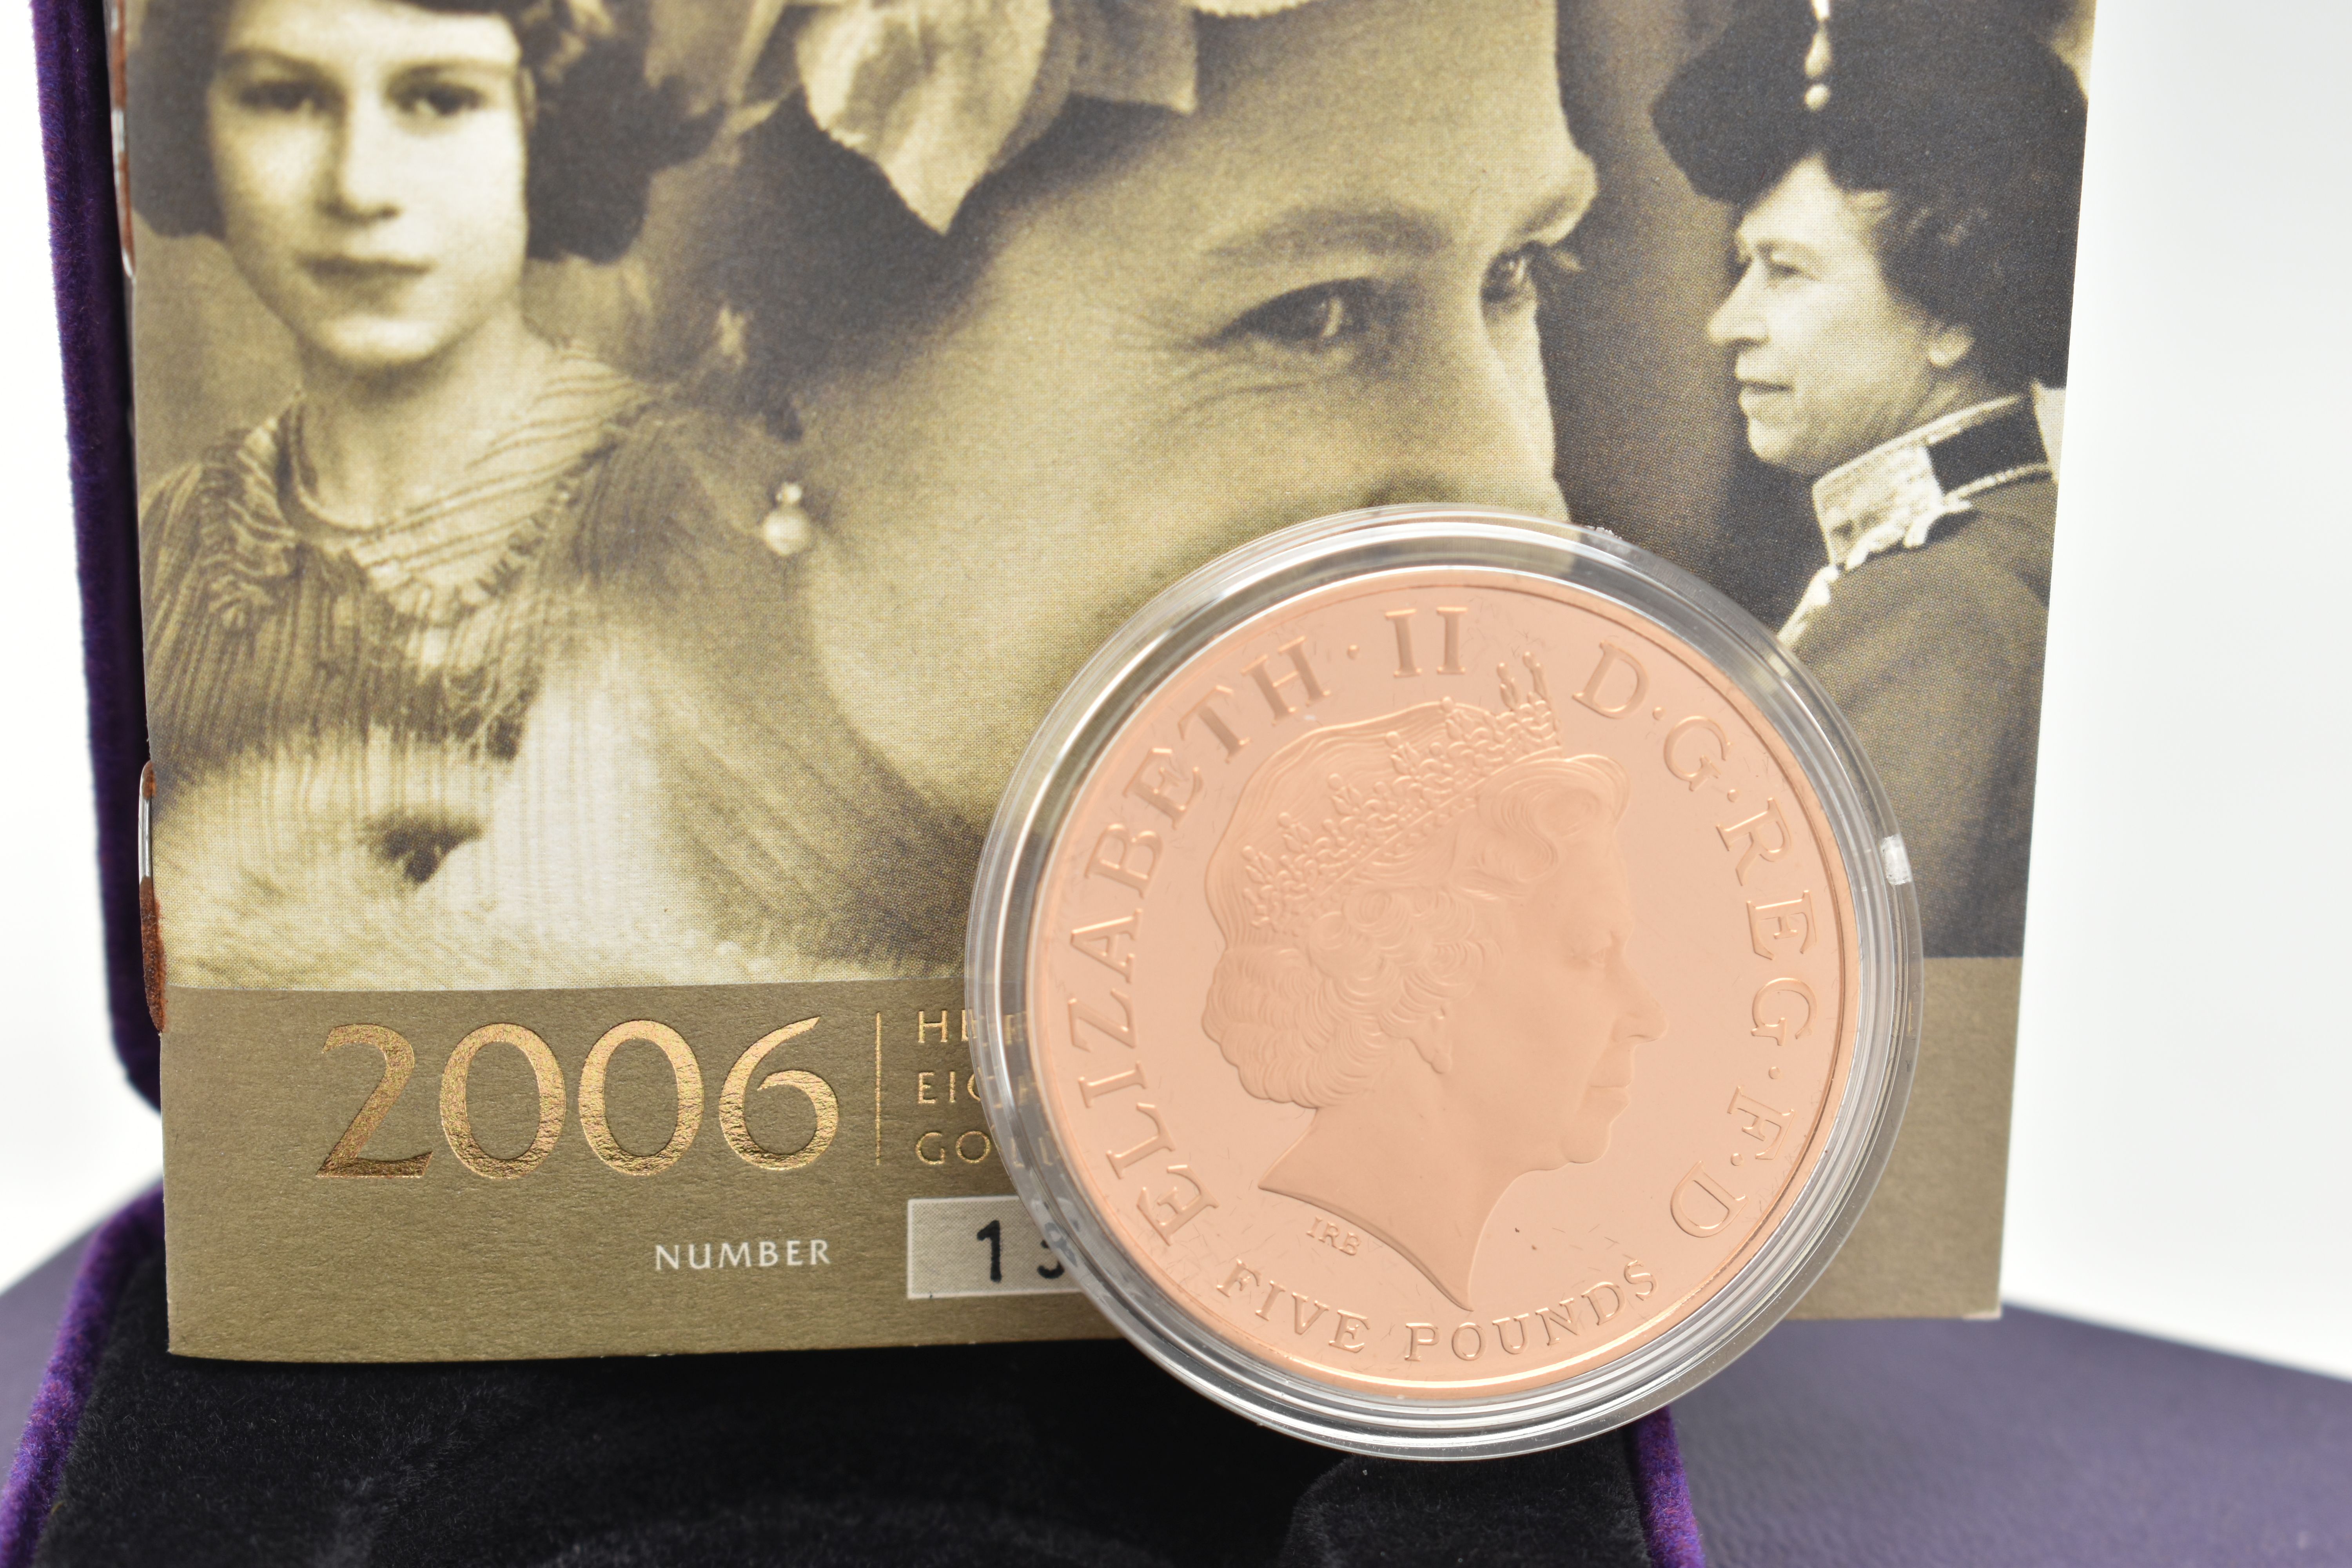 A ROYAL MINT 2006 QUEEN ELIZABETH II GOLD PROOF CROWN COIN, Five pound, 22ct gold, 38.6mm - Image 2 of 2